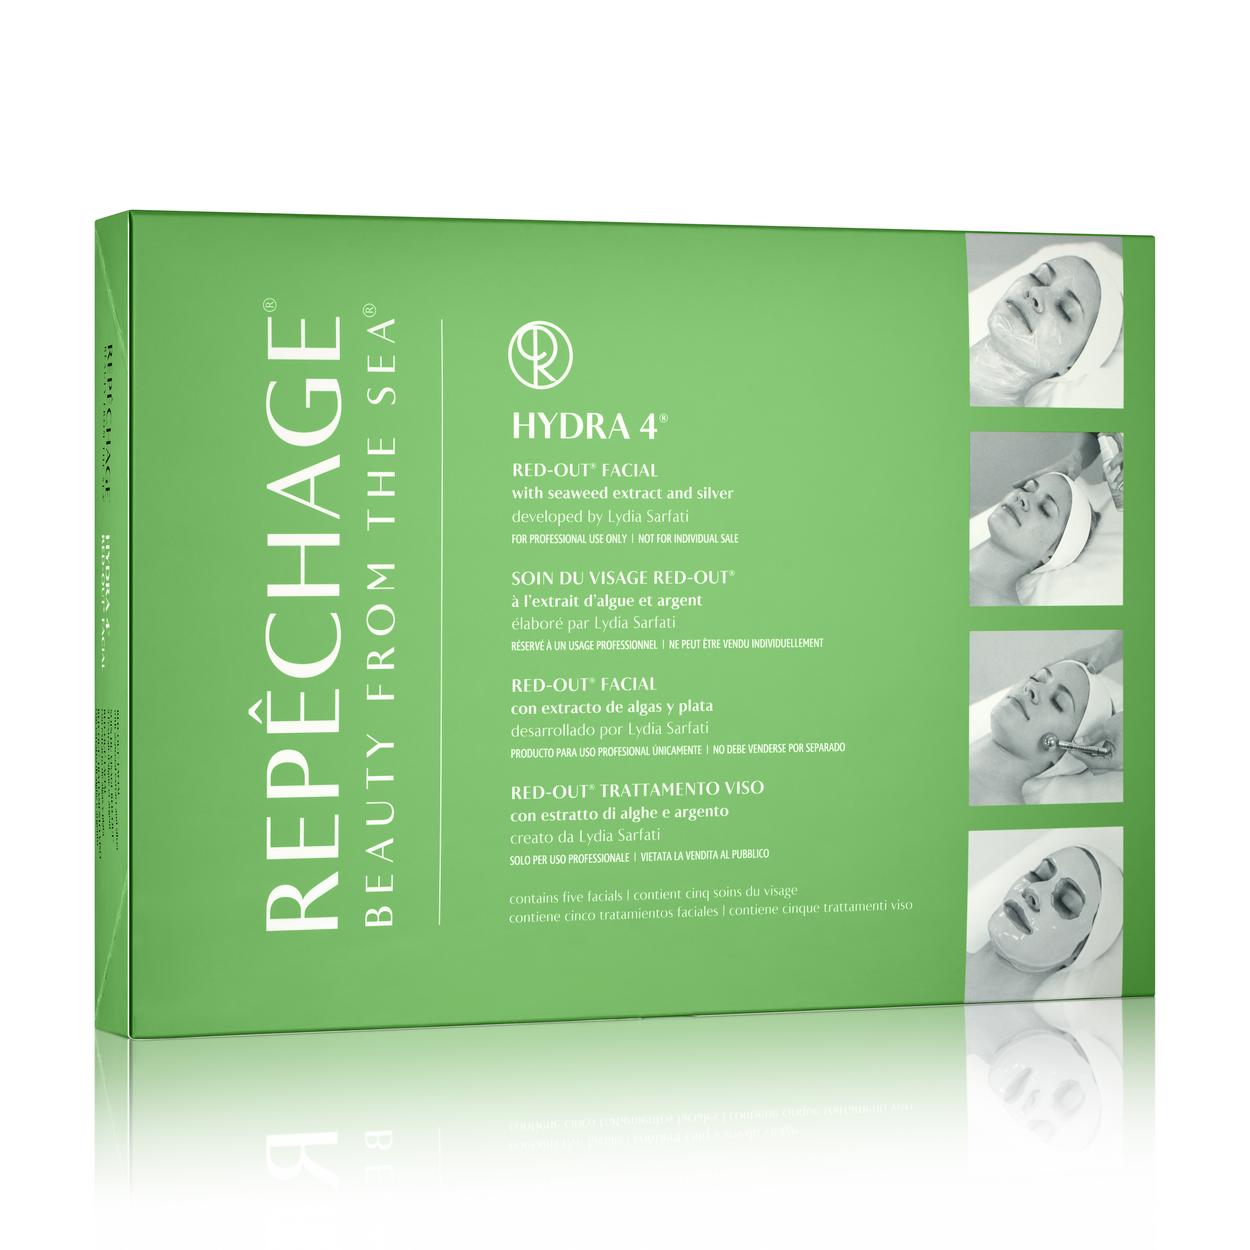 REPÊCHAGE HYDRA 4 RED-OUT FACIAL KIT (5 TREATMENTS)